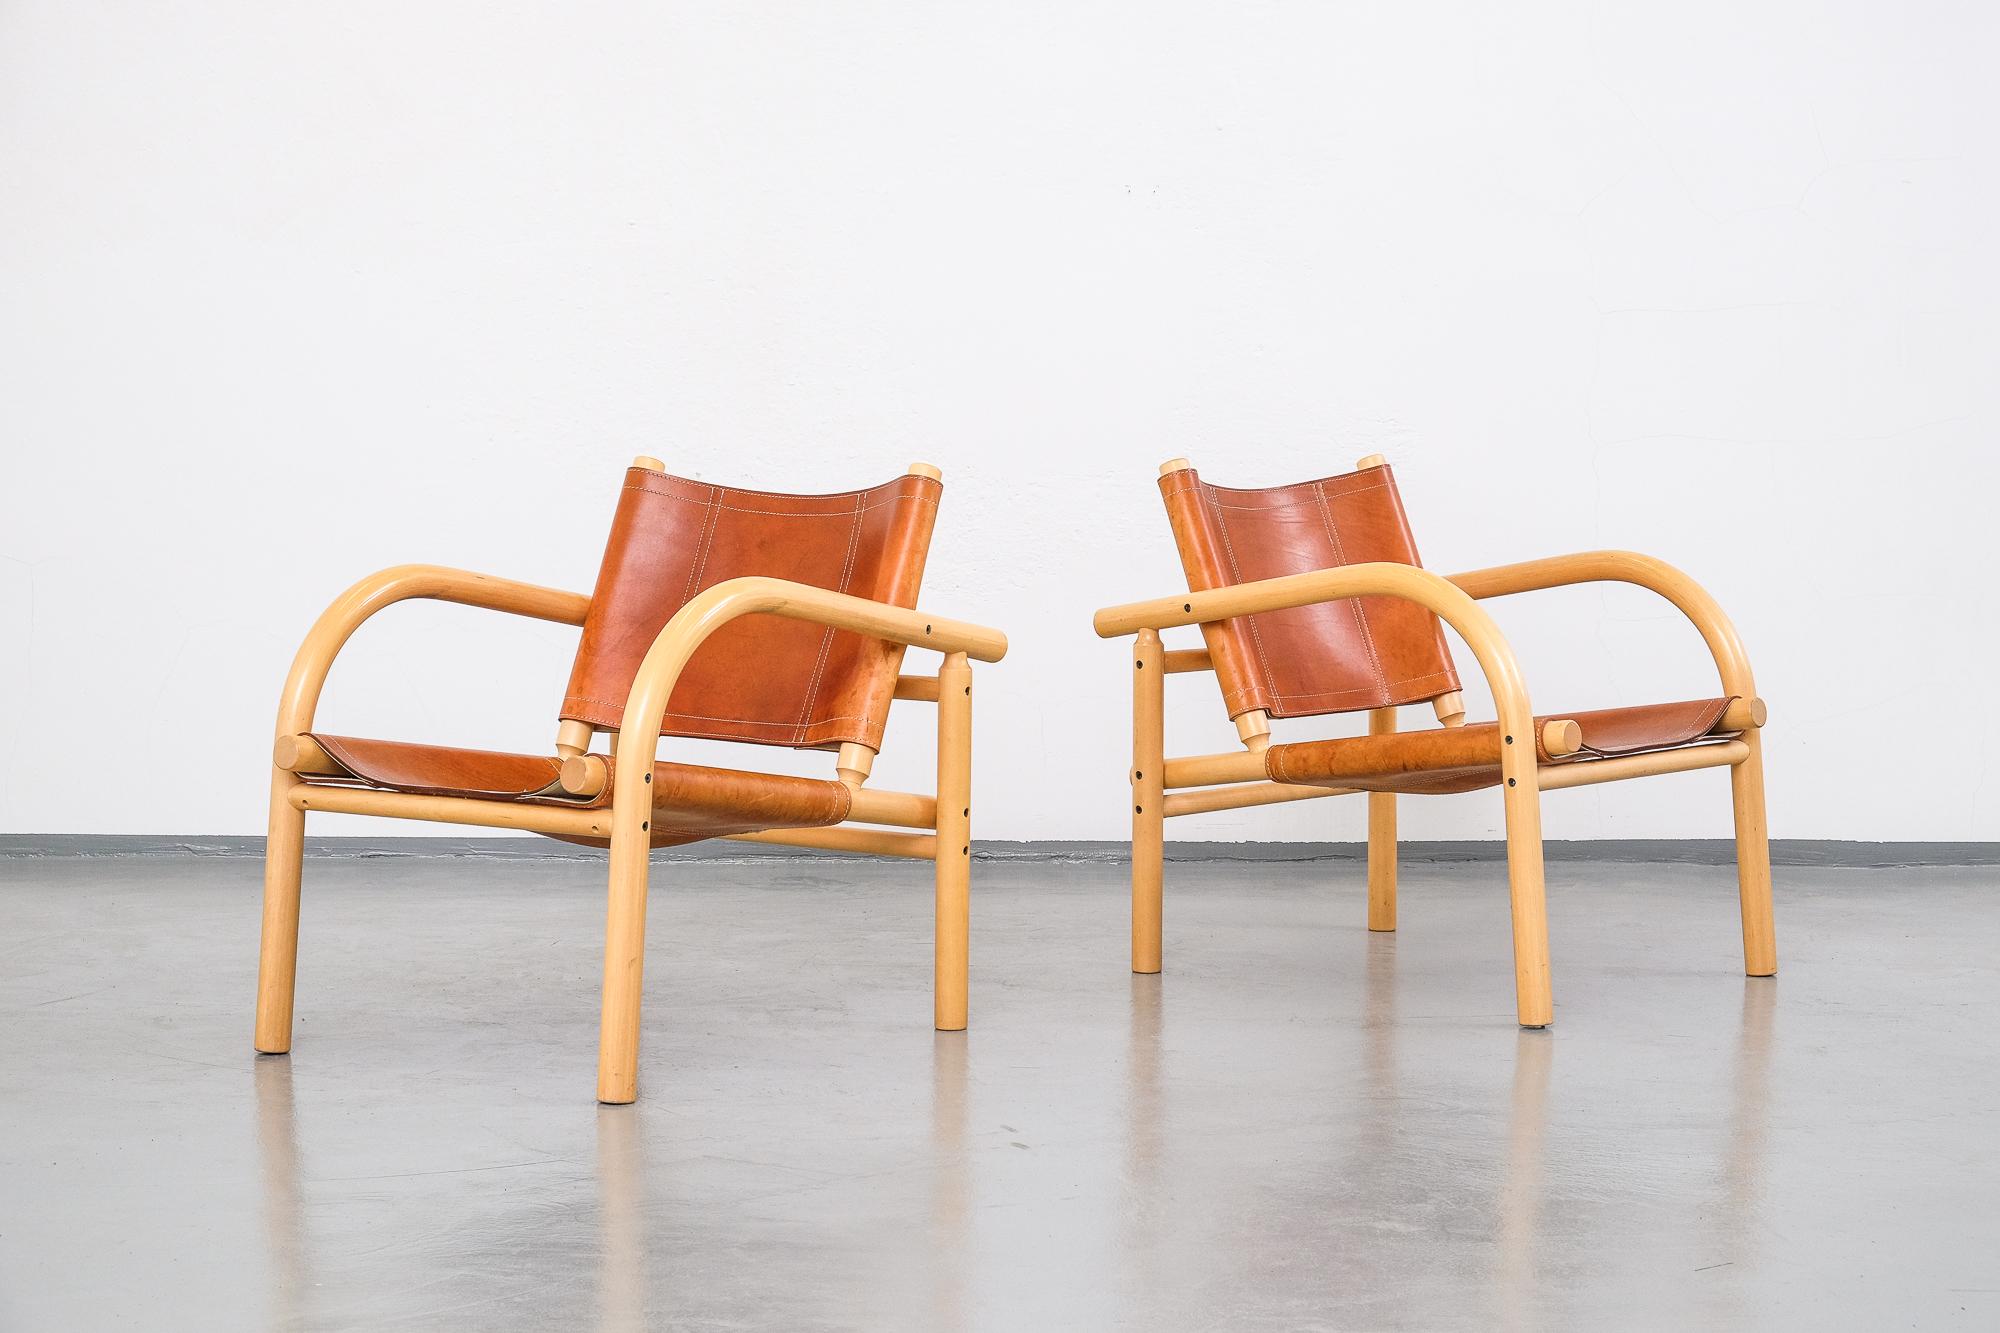 Classic safari chair from Finland designed in 1974 by Ben af Schultén for Artek. Birch frame with seat and back in natural leather. This is the bigger lounge chair model.